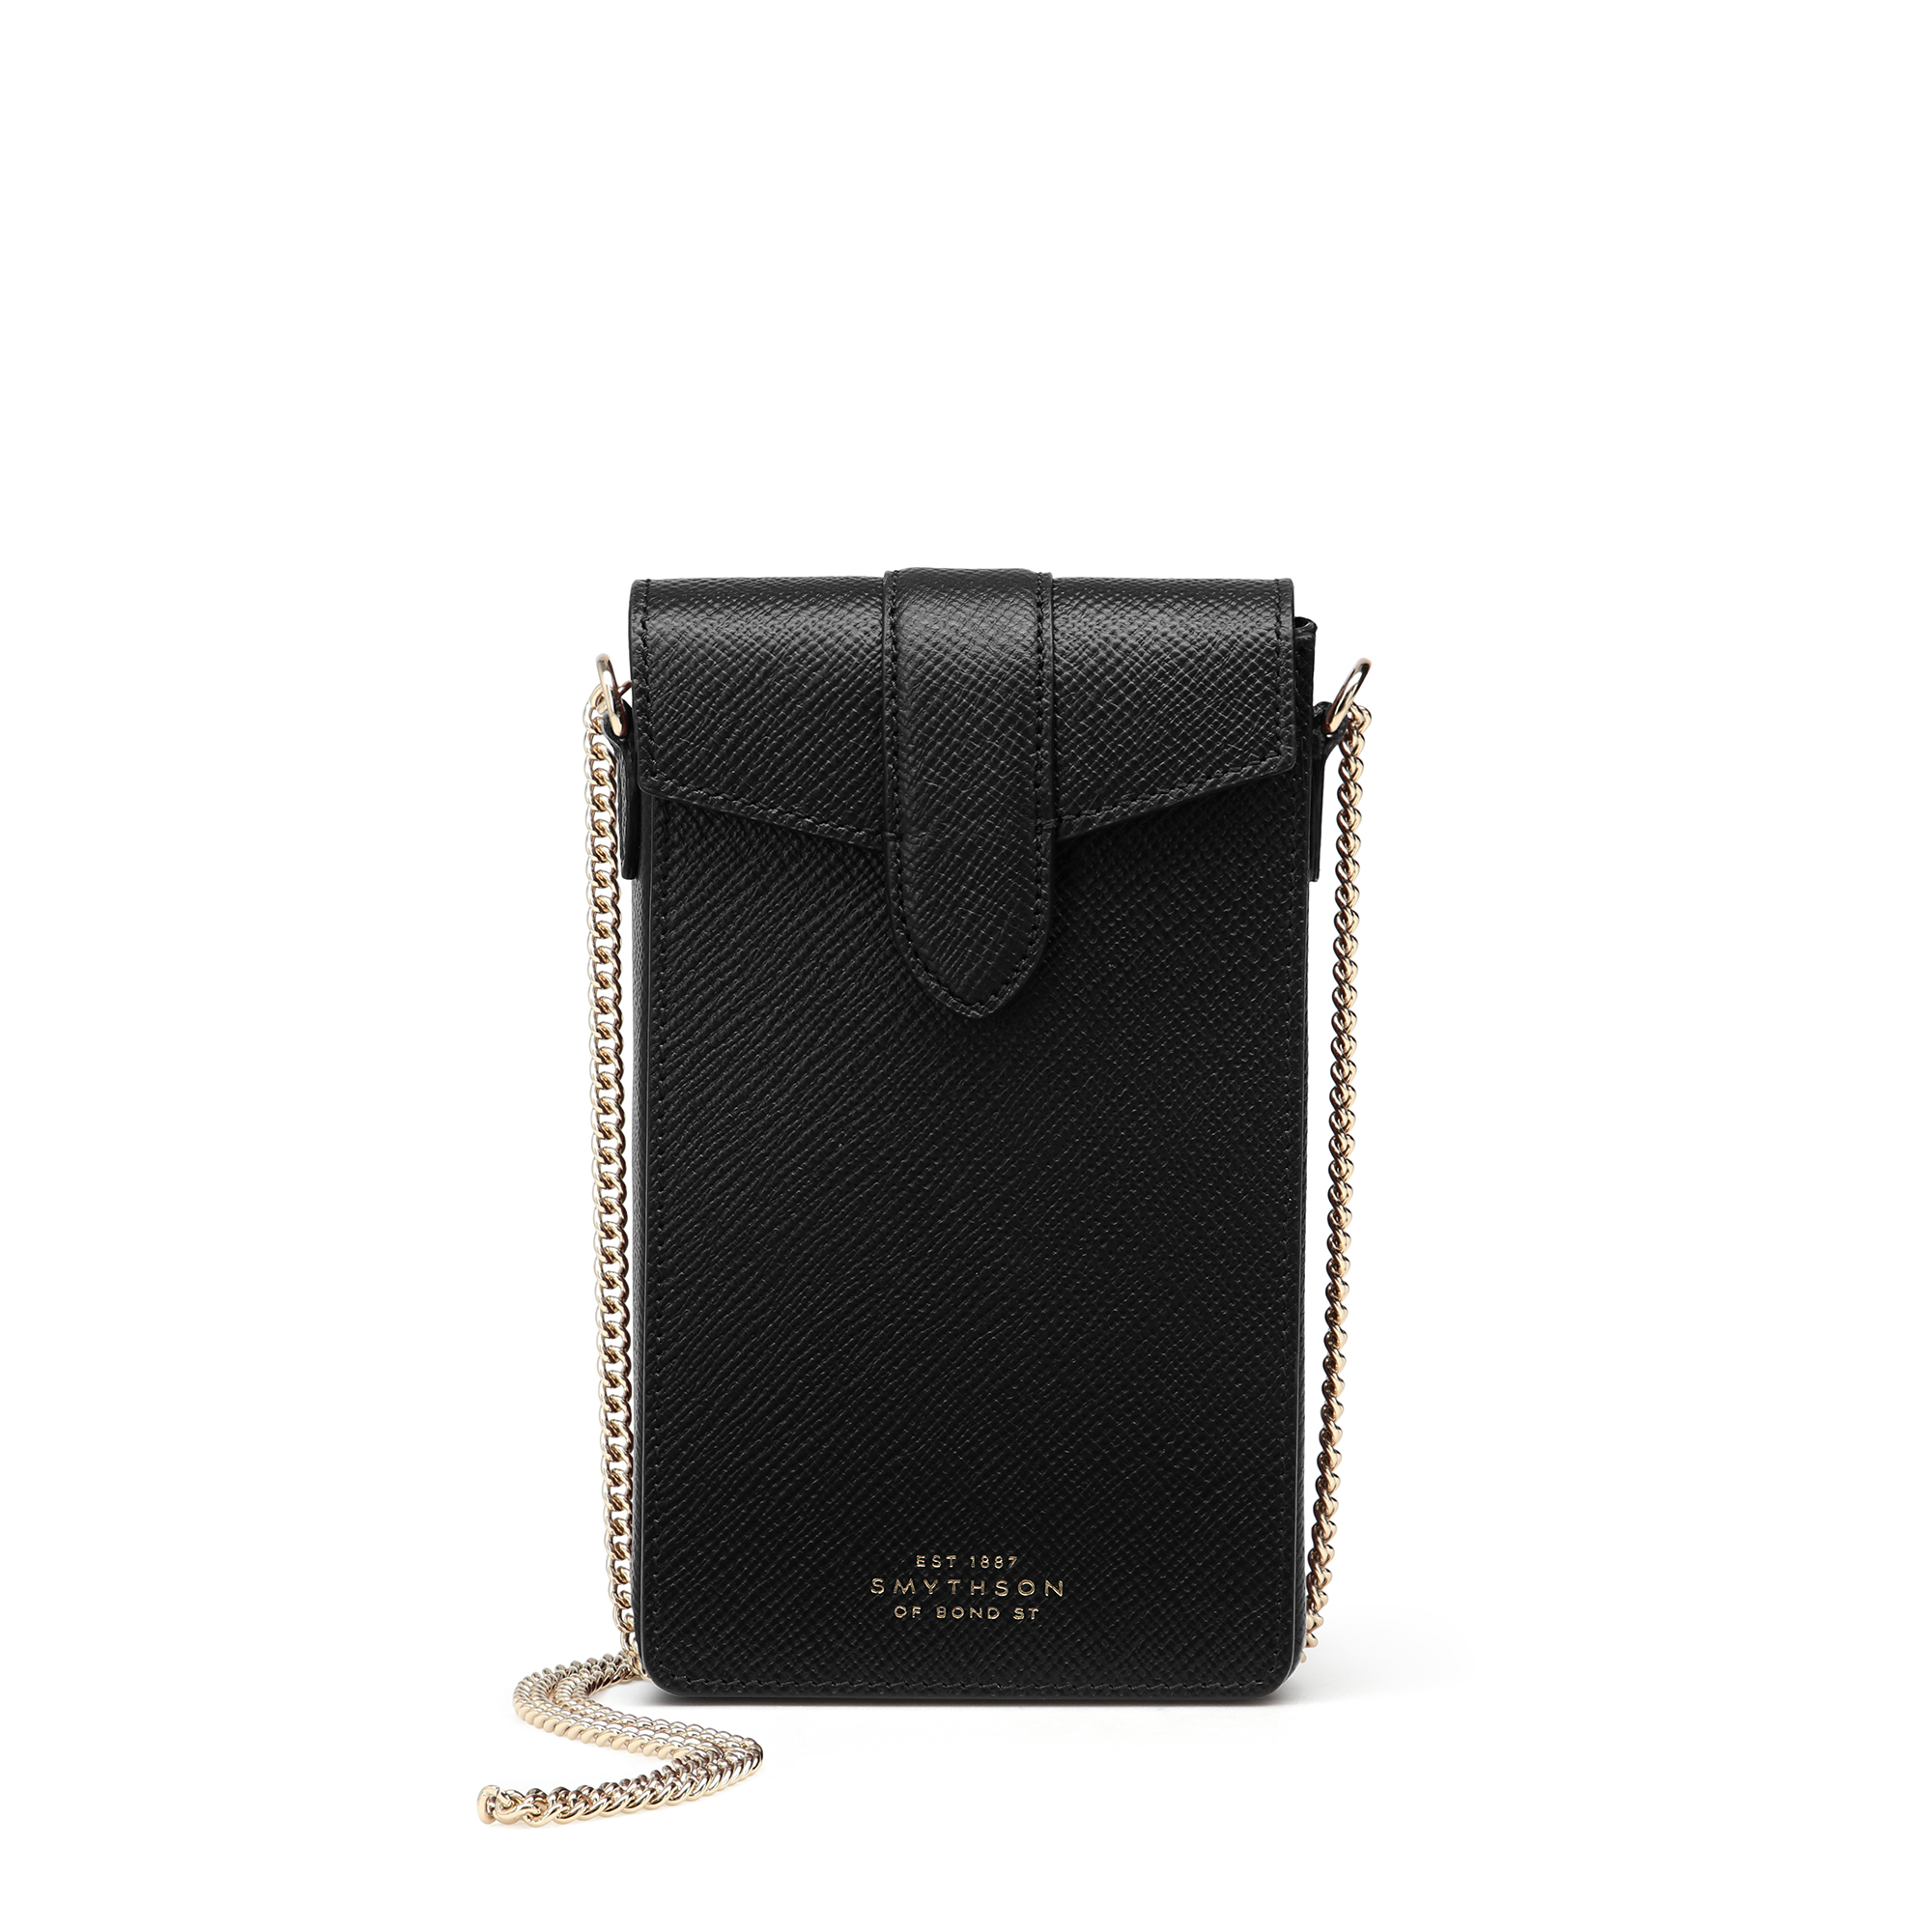 SMYTHSON SMYTHSON PHONE CASE WITH CHAIN IN PANAMA,1026827